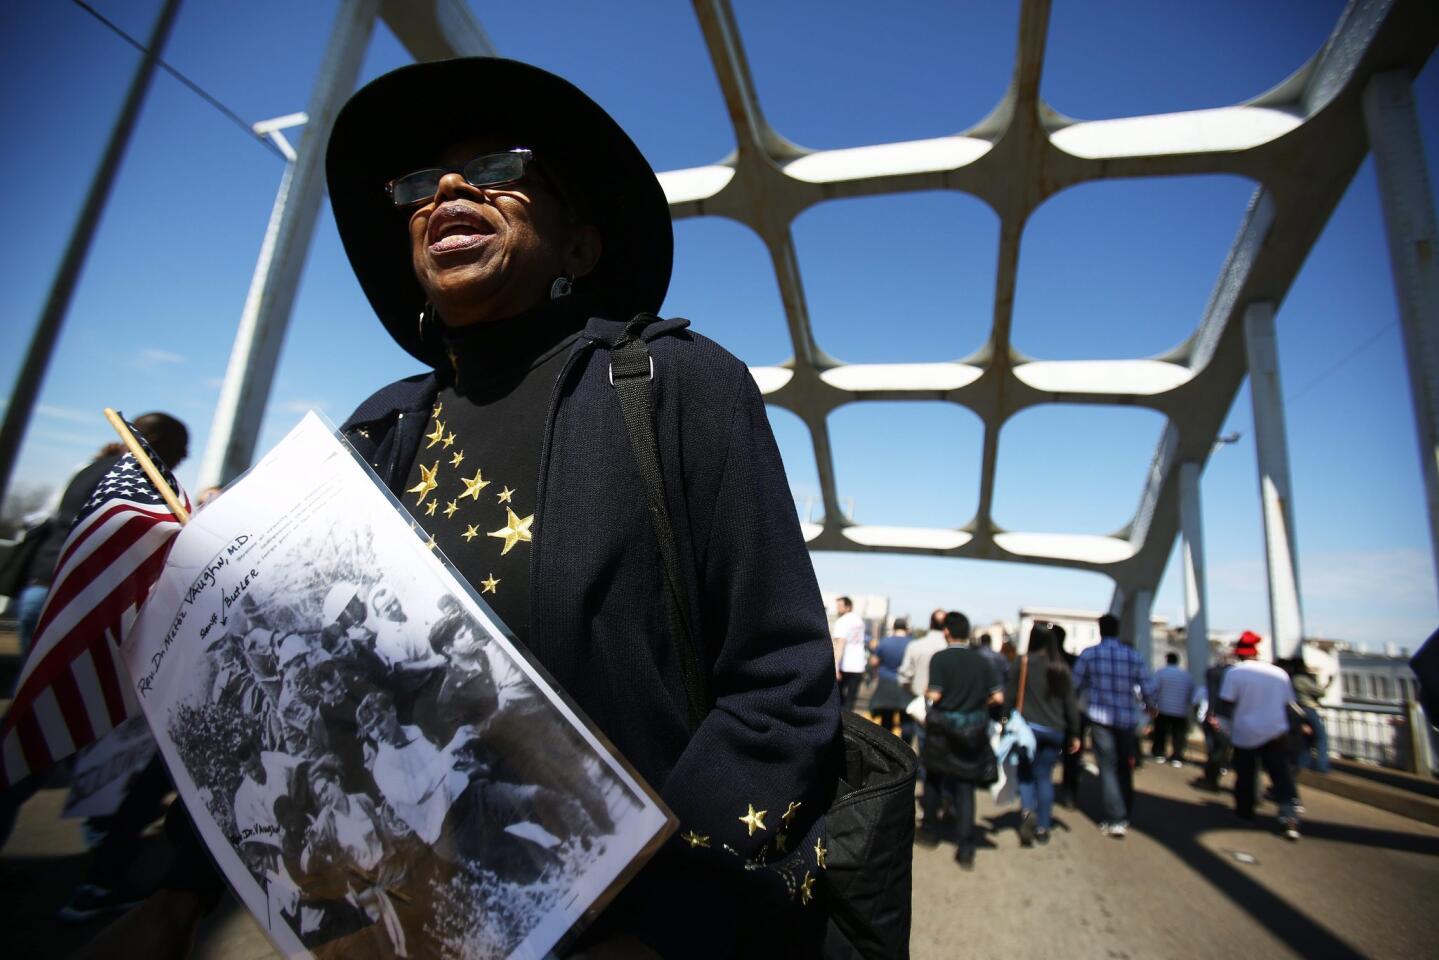 Dorothy Vaughn walks across the Edmund Pettus Bridge during the 50th anniversary commemoration of the 'Bloody Sunday' crossing in Selma, Alabama. Nearly 600 people marching for voting rights from Selma to Montgomery, Alabama, USA, on 07 march 1965 were tear-gassed and beaten by a county posse and state troopers at the bridge. The events led to passage of the voting rights act by the US Congress.